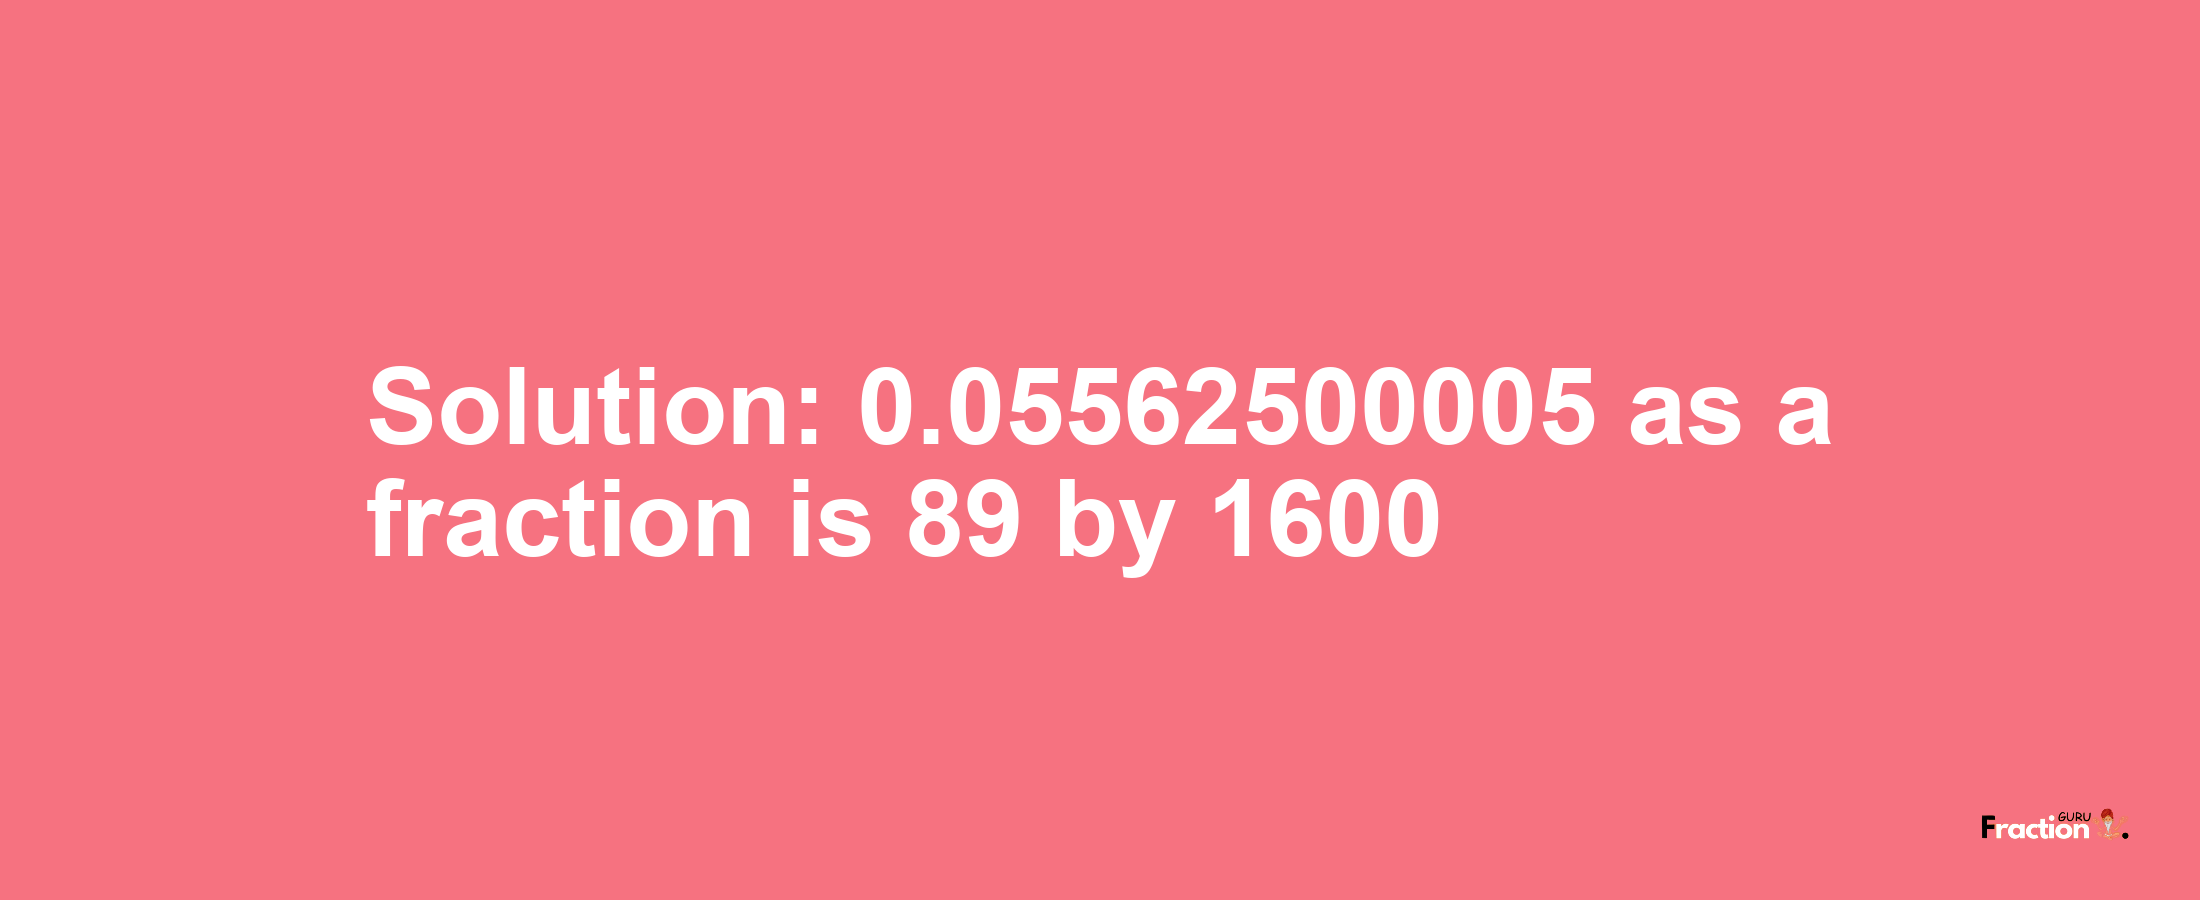 Solution:0.05562500005 as a fraction is 89/1600